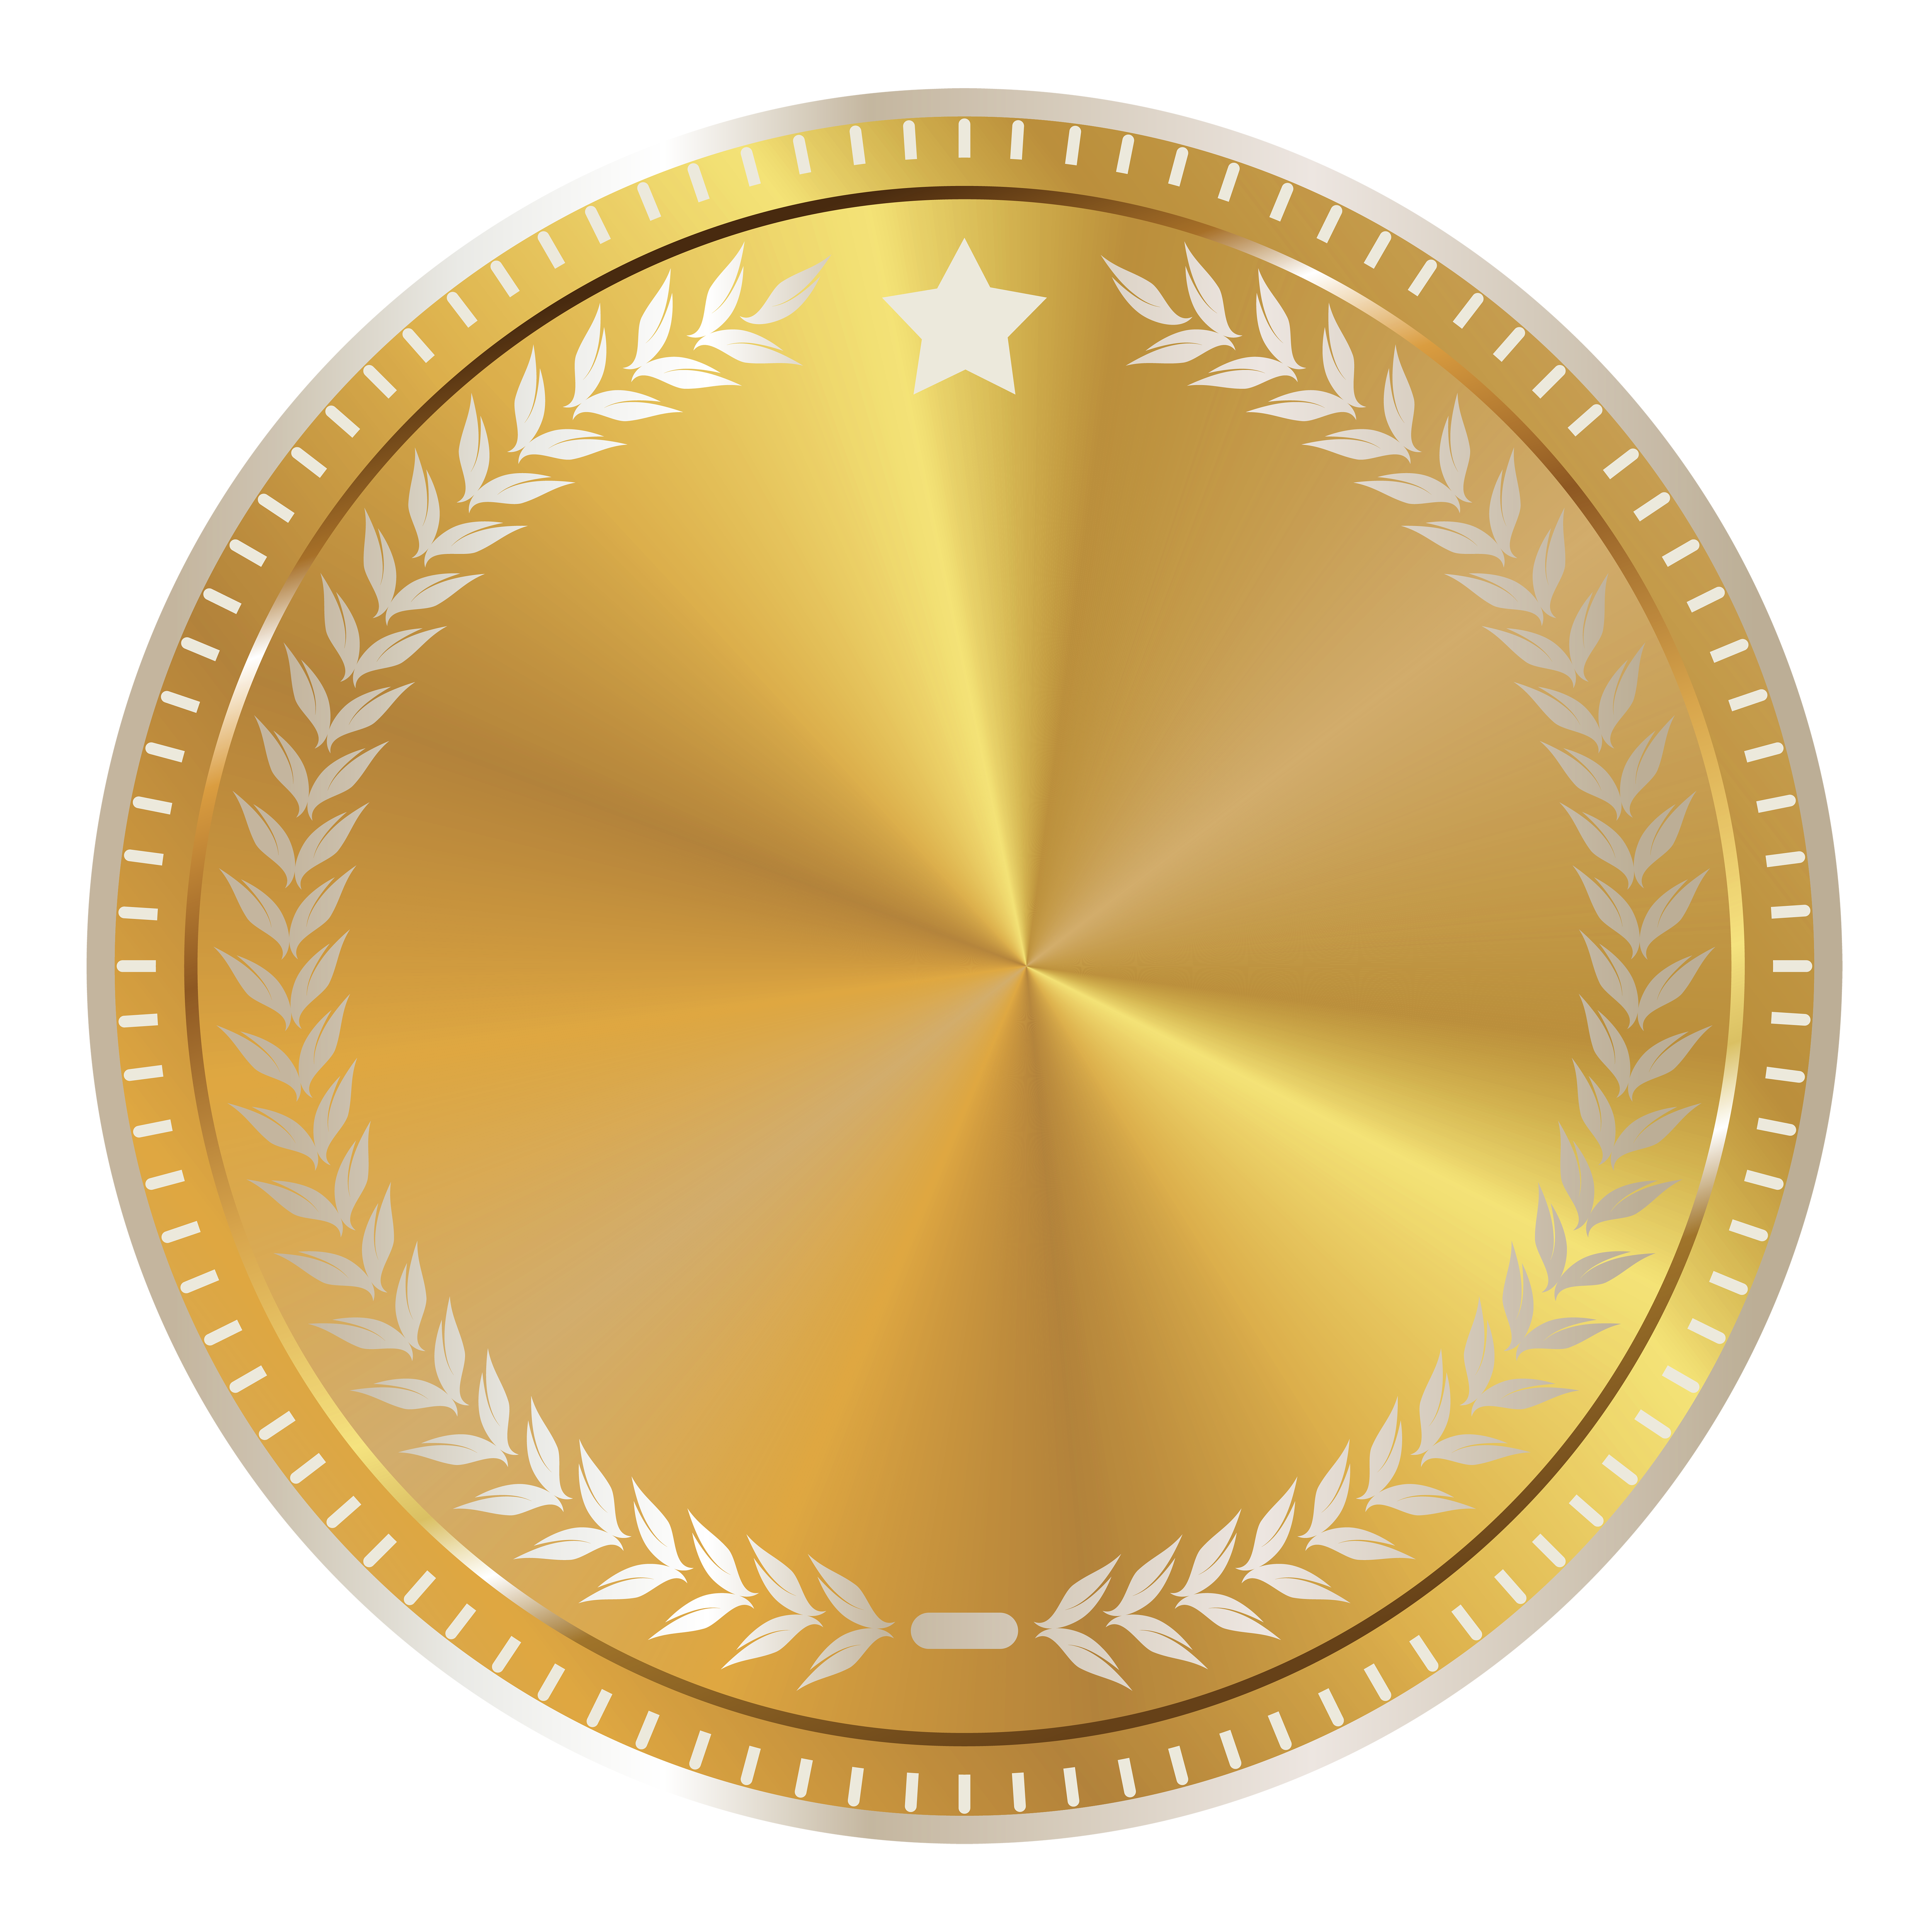 badge clipart gold